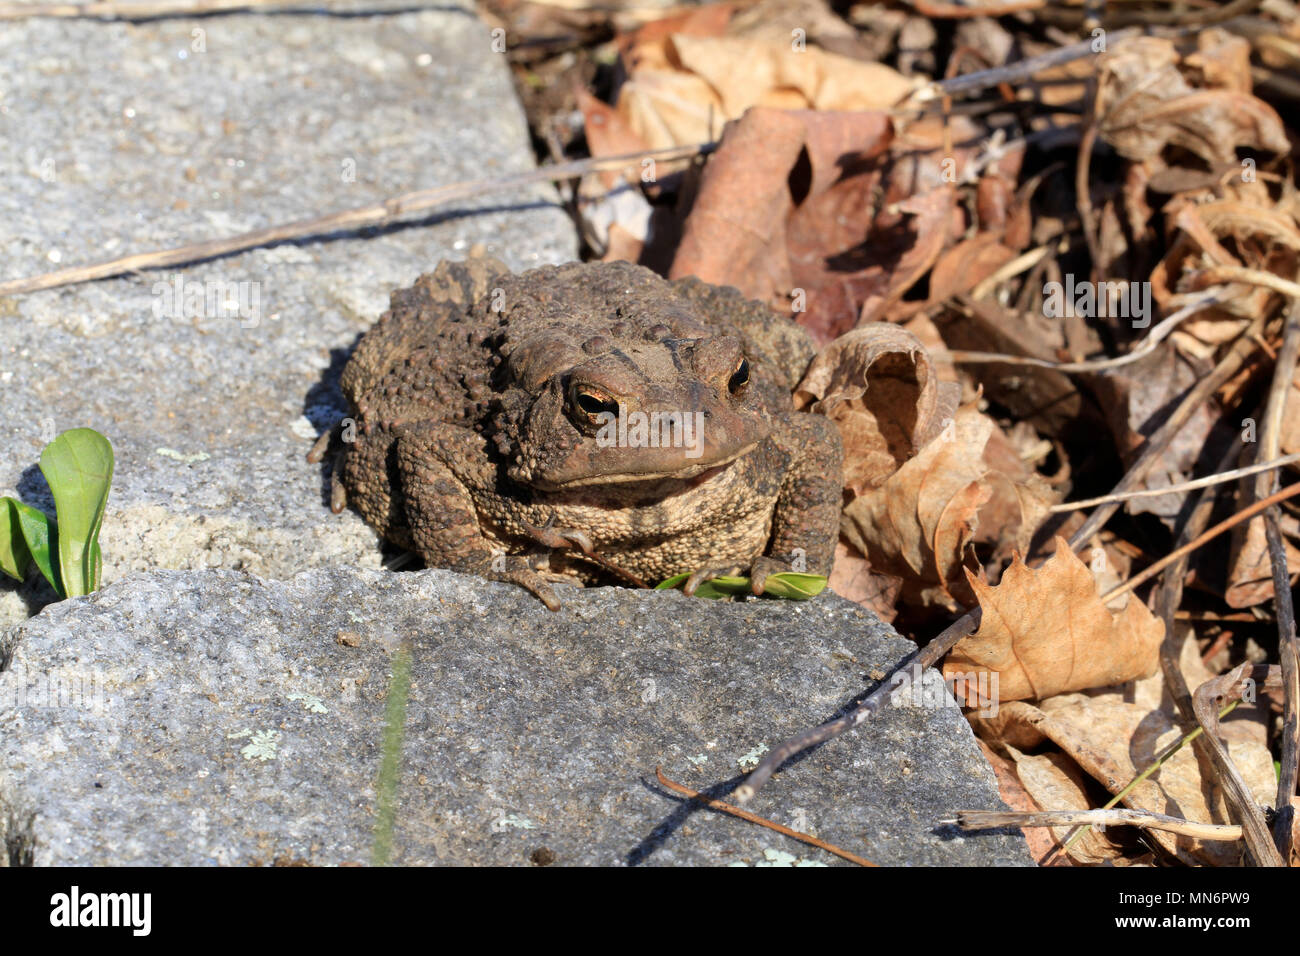 Close-up of a juvenile Fowler's toad (Anaxyrus fowleri) lounging on a garden stone beside leaf litter in spring Stock Photo